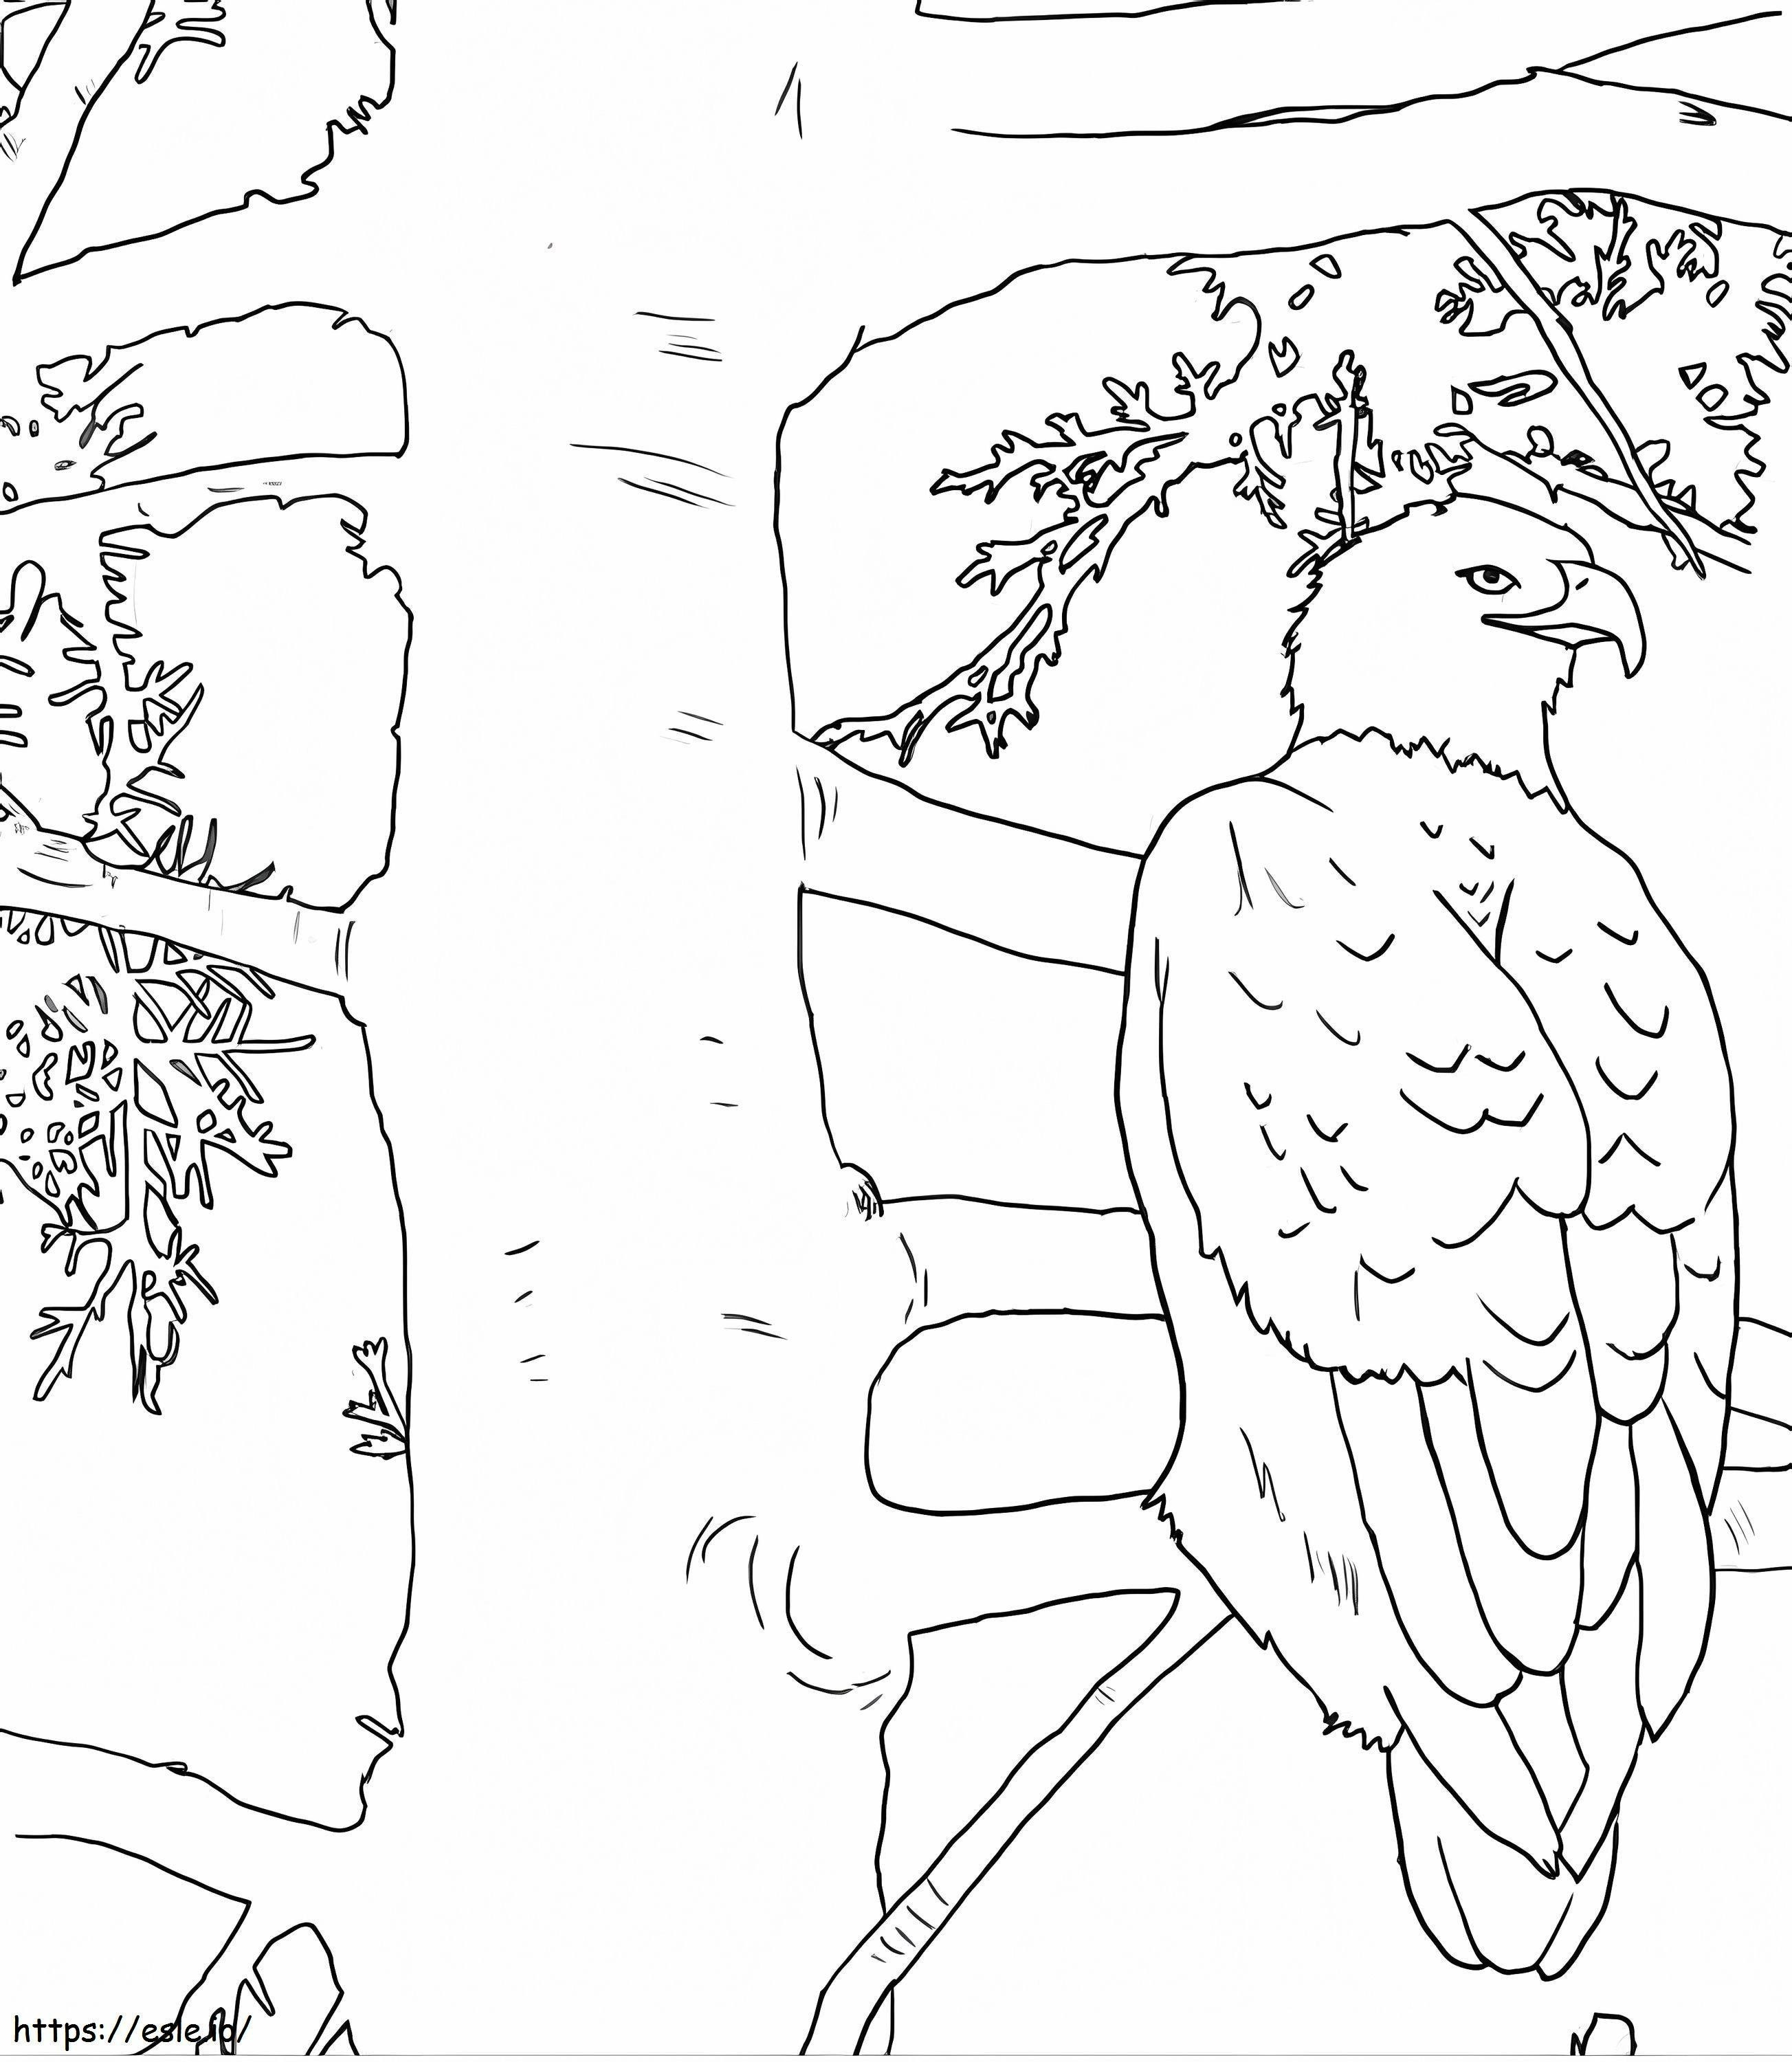 Bald Eagle In The Tree coloring page